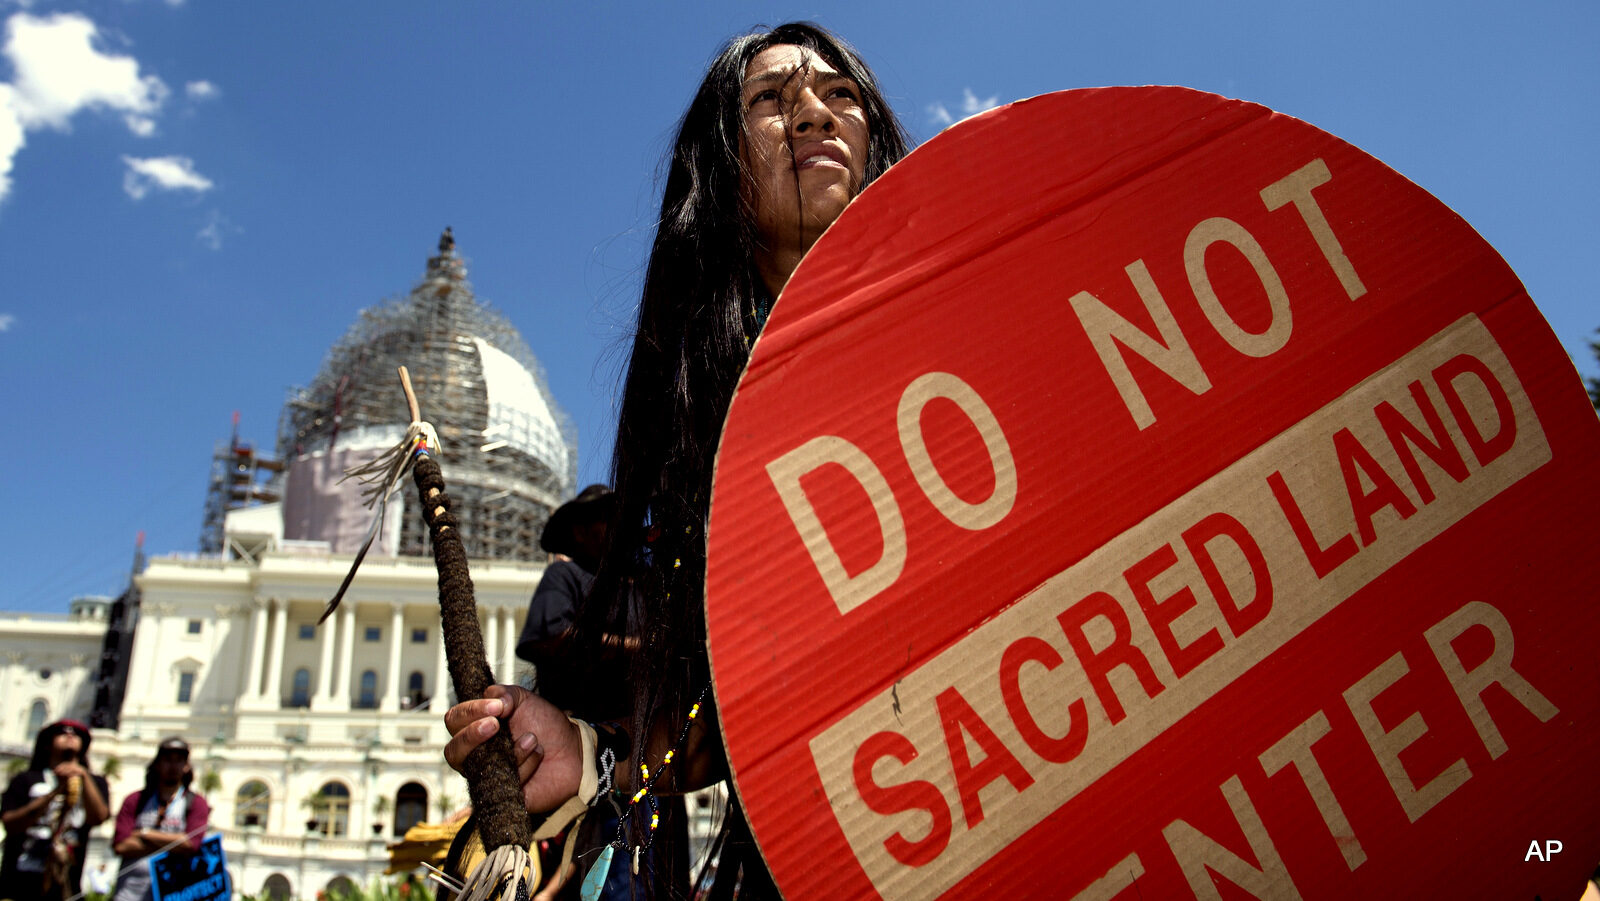 An Apache activist dancer performs in a rally to save Oak Flat, land near Superior, Ariz., sacred to Western Apache tribes, in front of the U.S. Capitol in Washington, Tuesday, July 22, 2015.